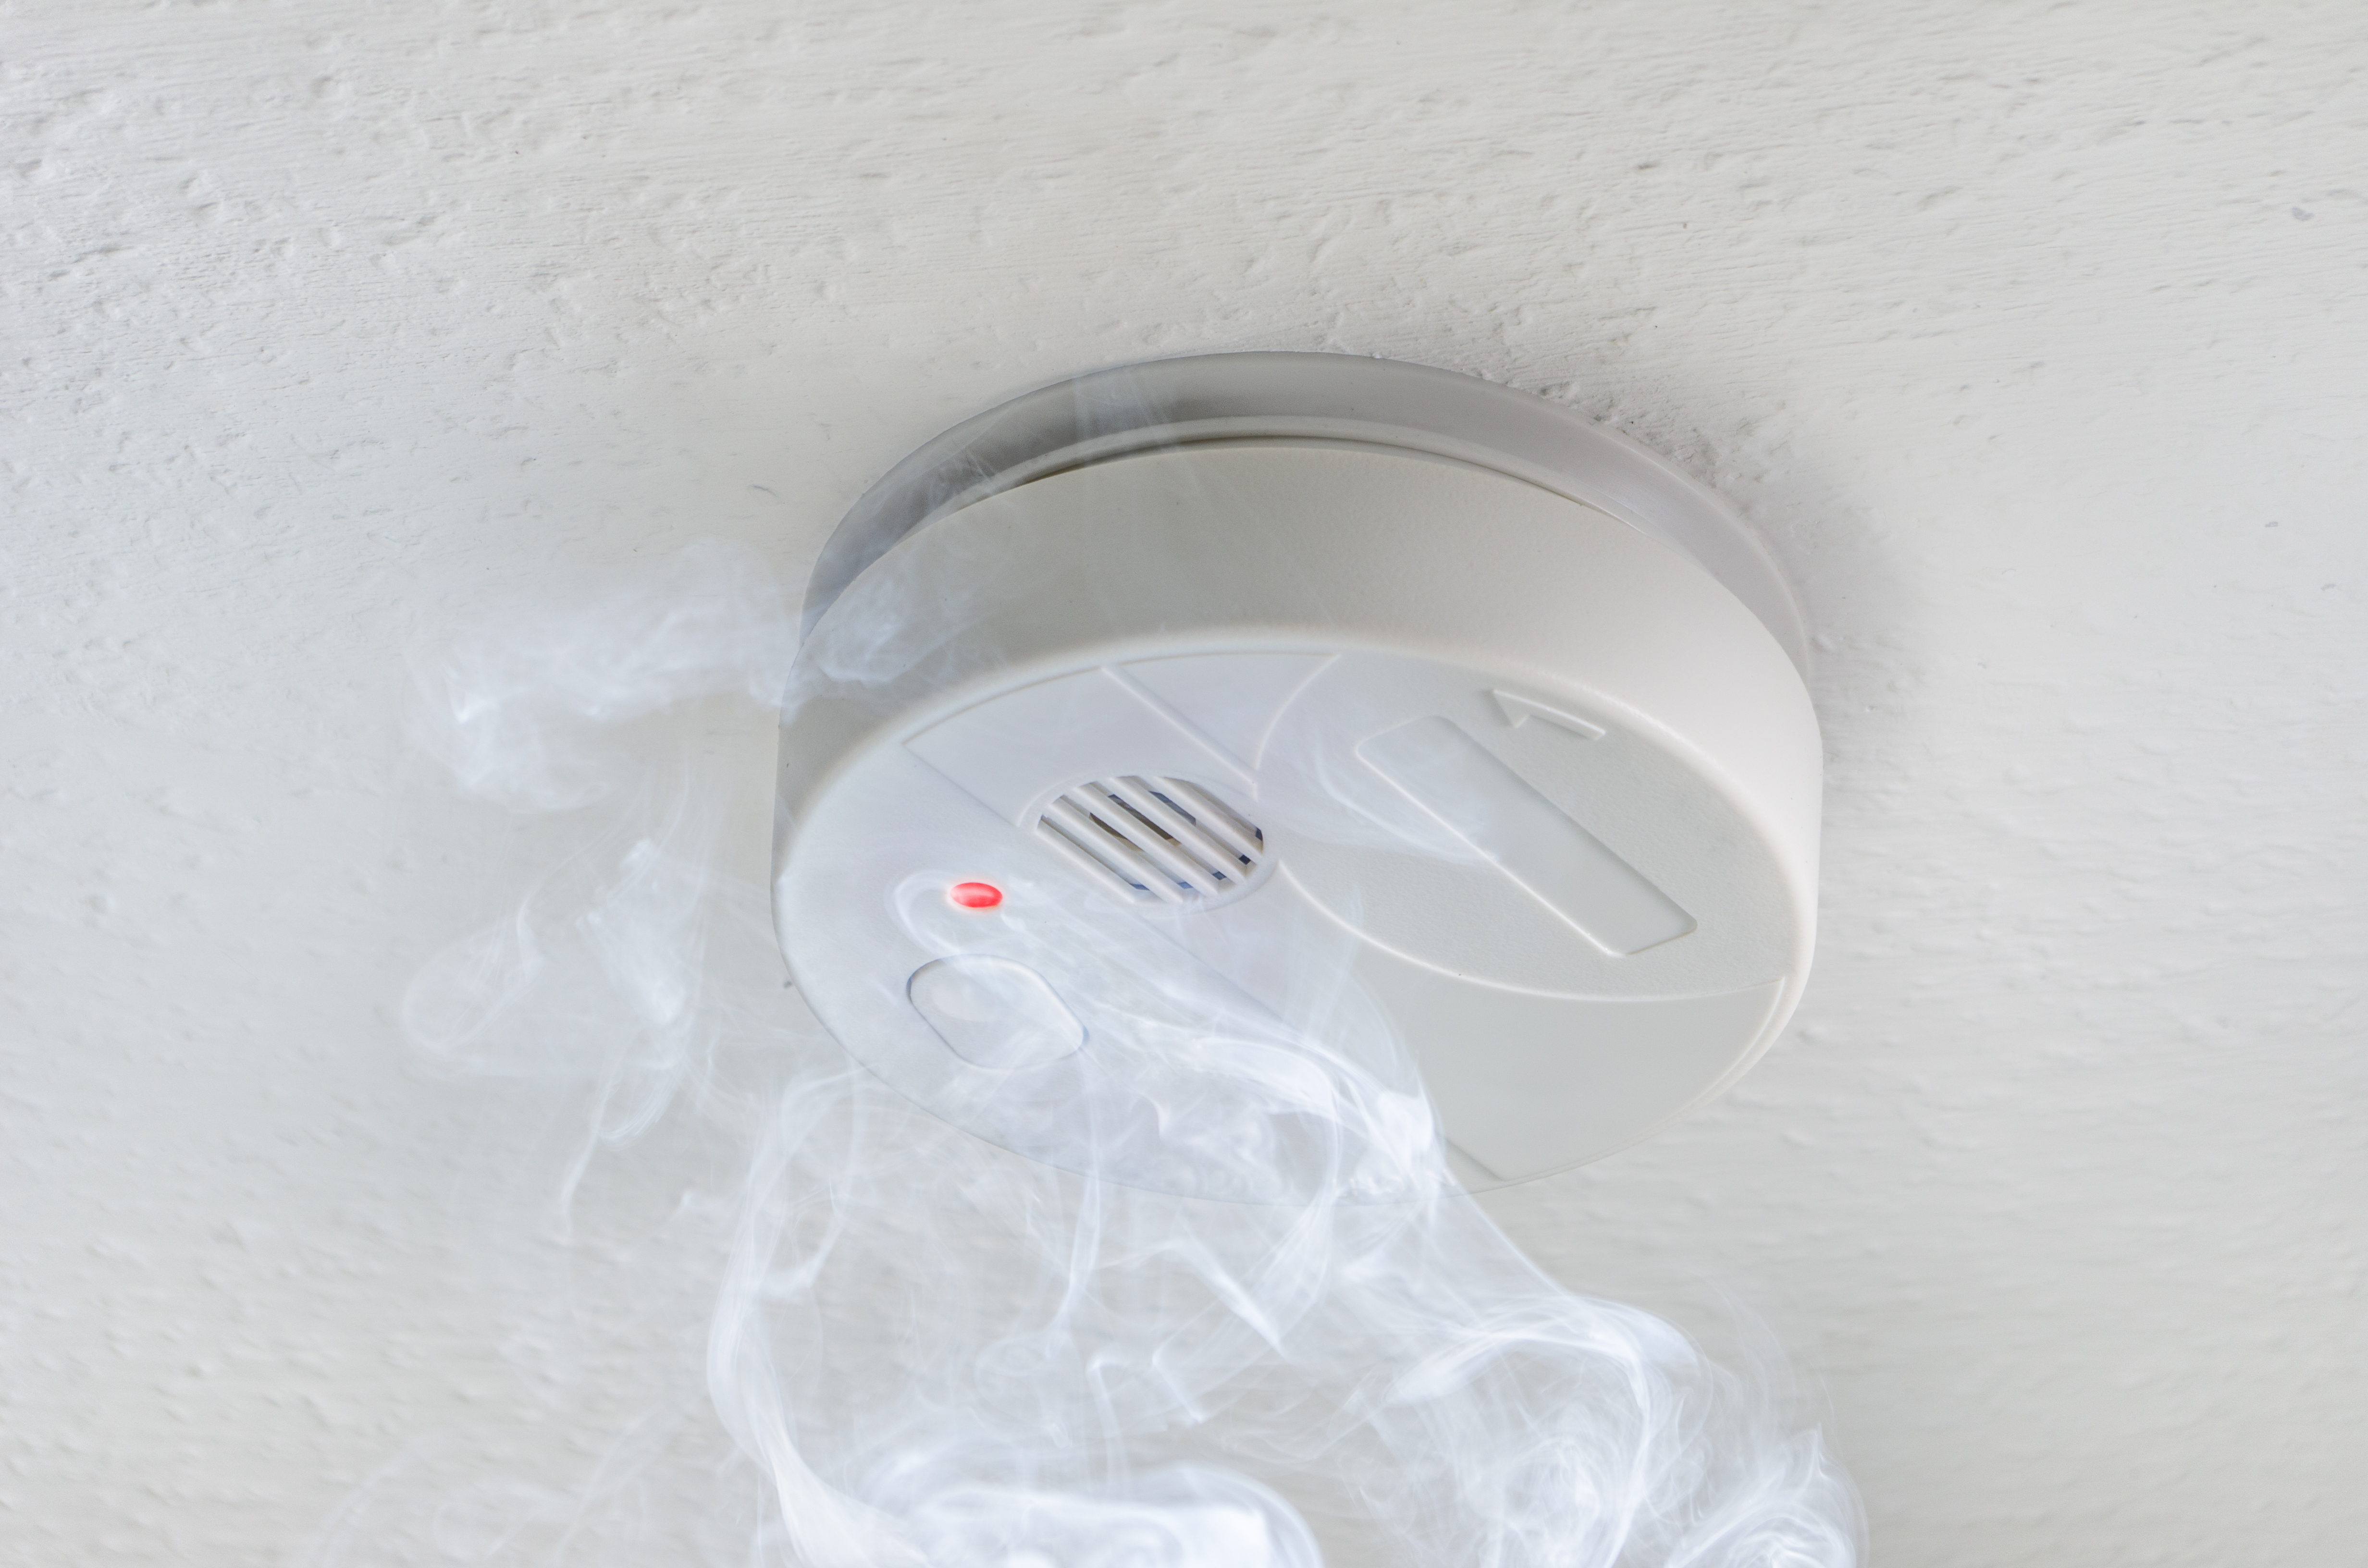 Are you SURE your smoke alarms work? Learn 3 vital tips